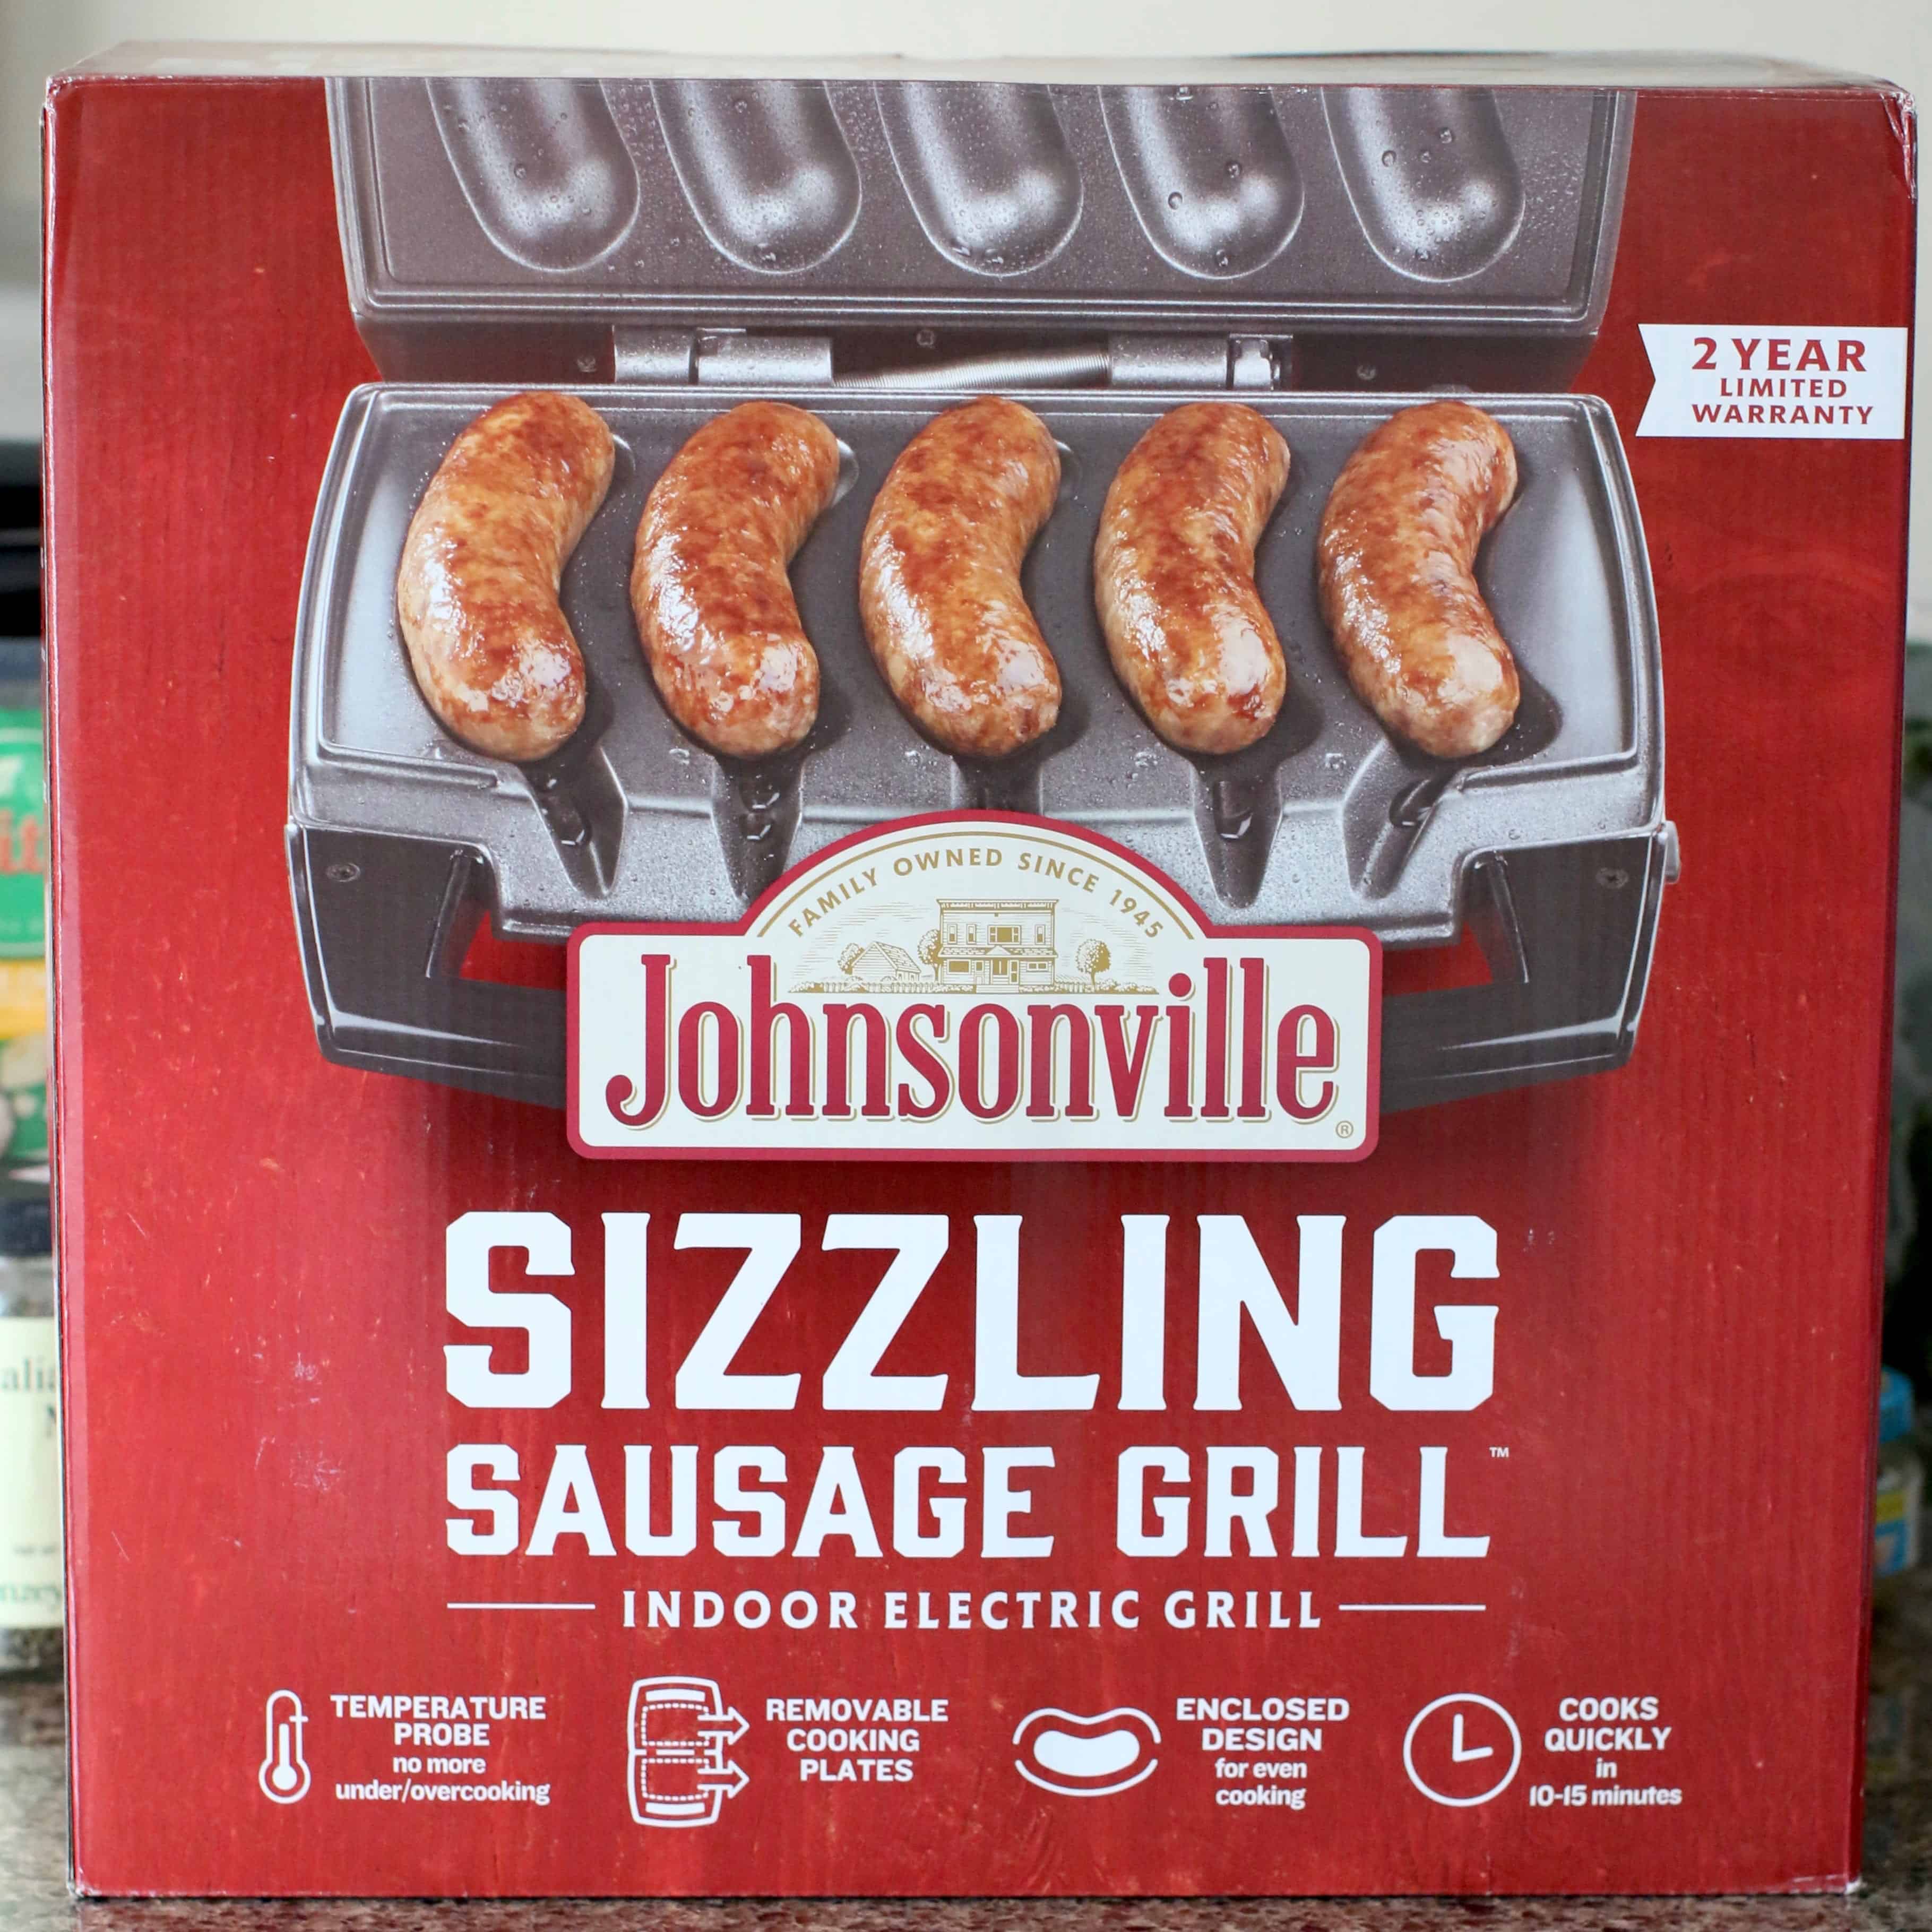 Johnsonville Sizzling Sausage Grill shown in a box.